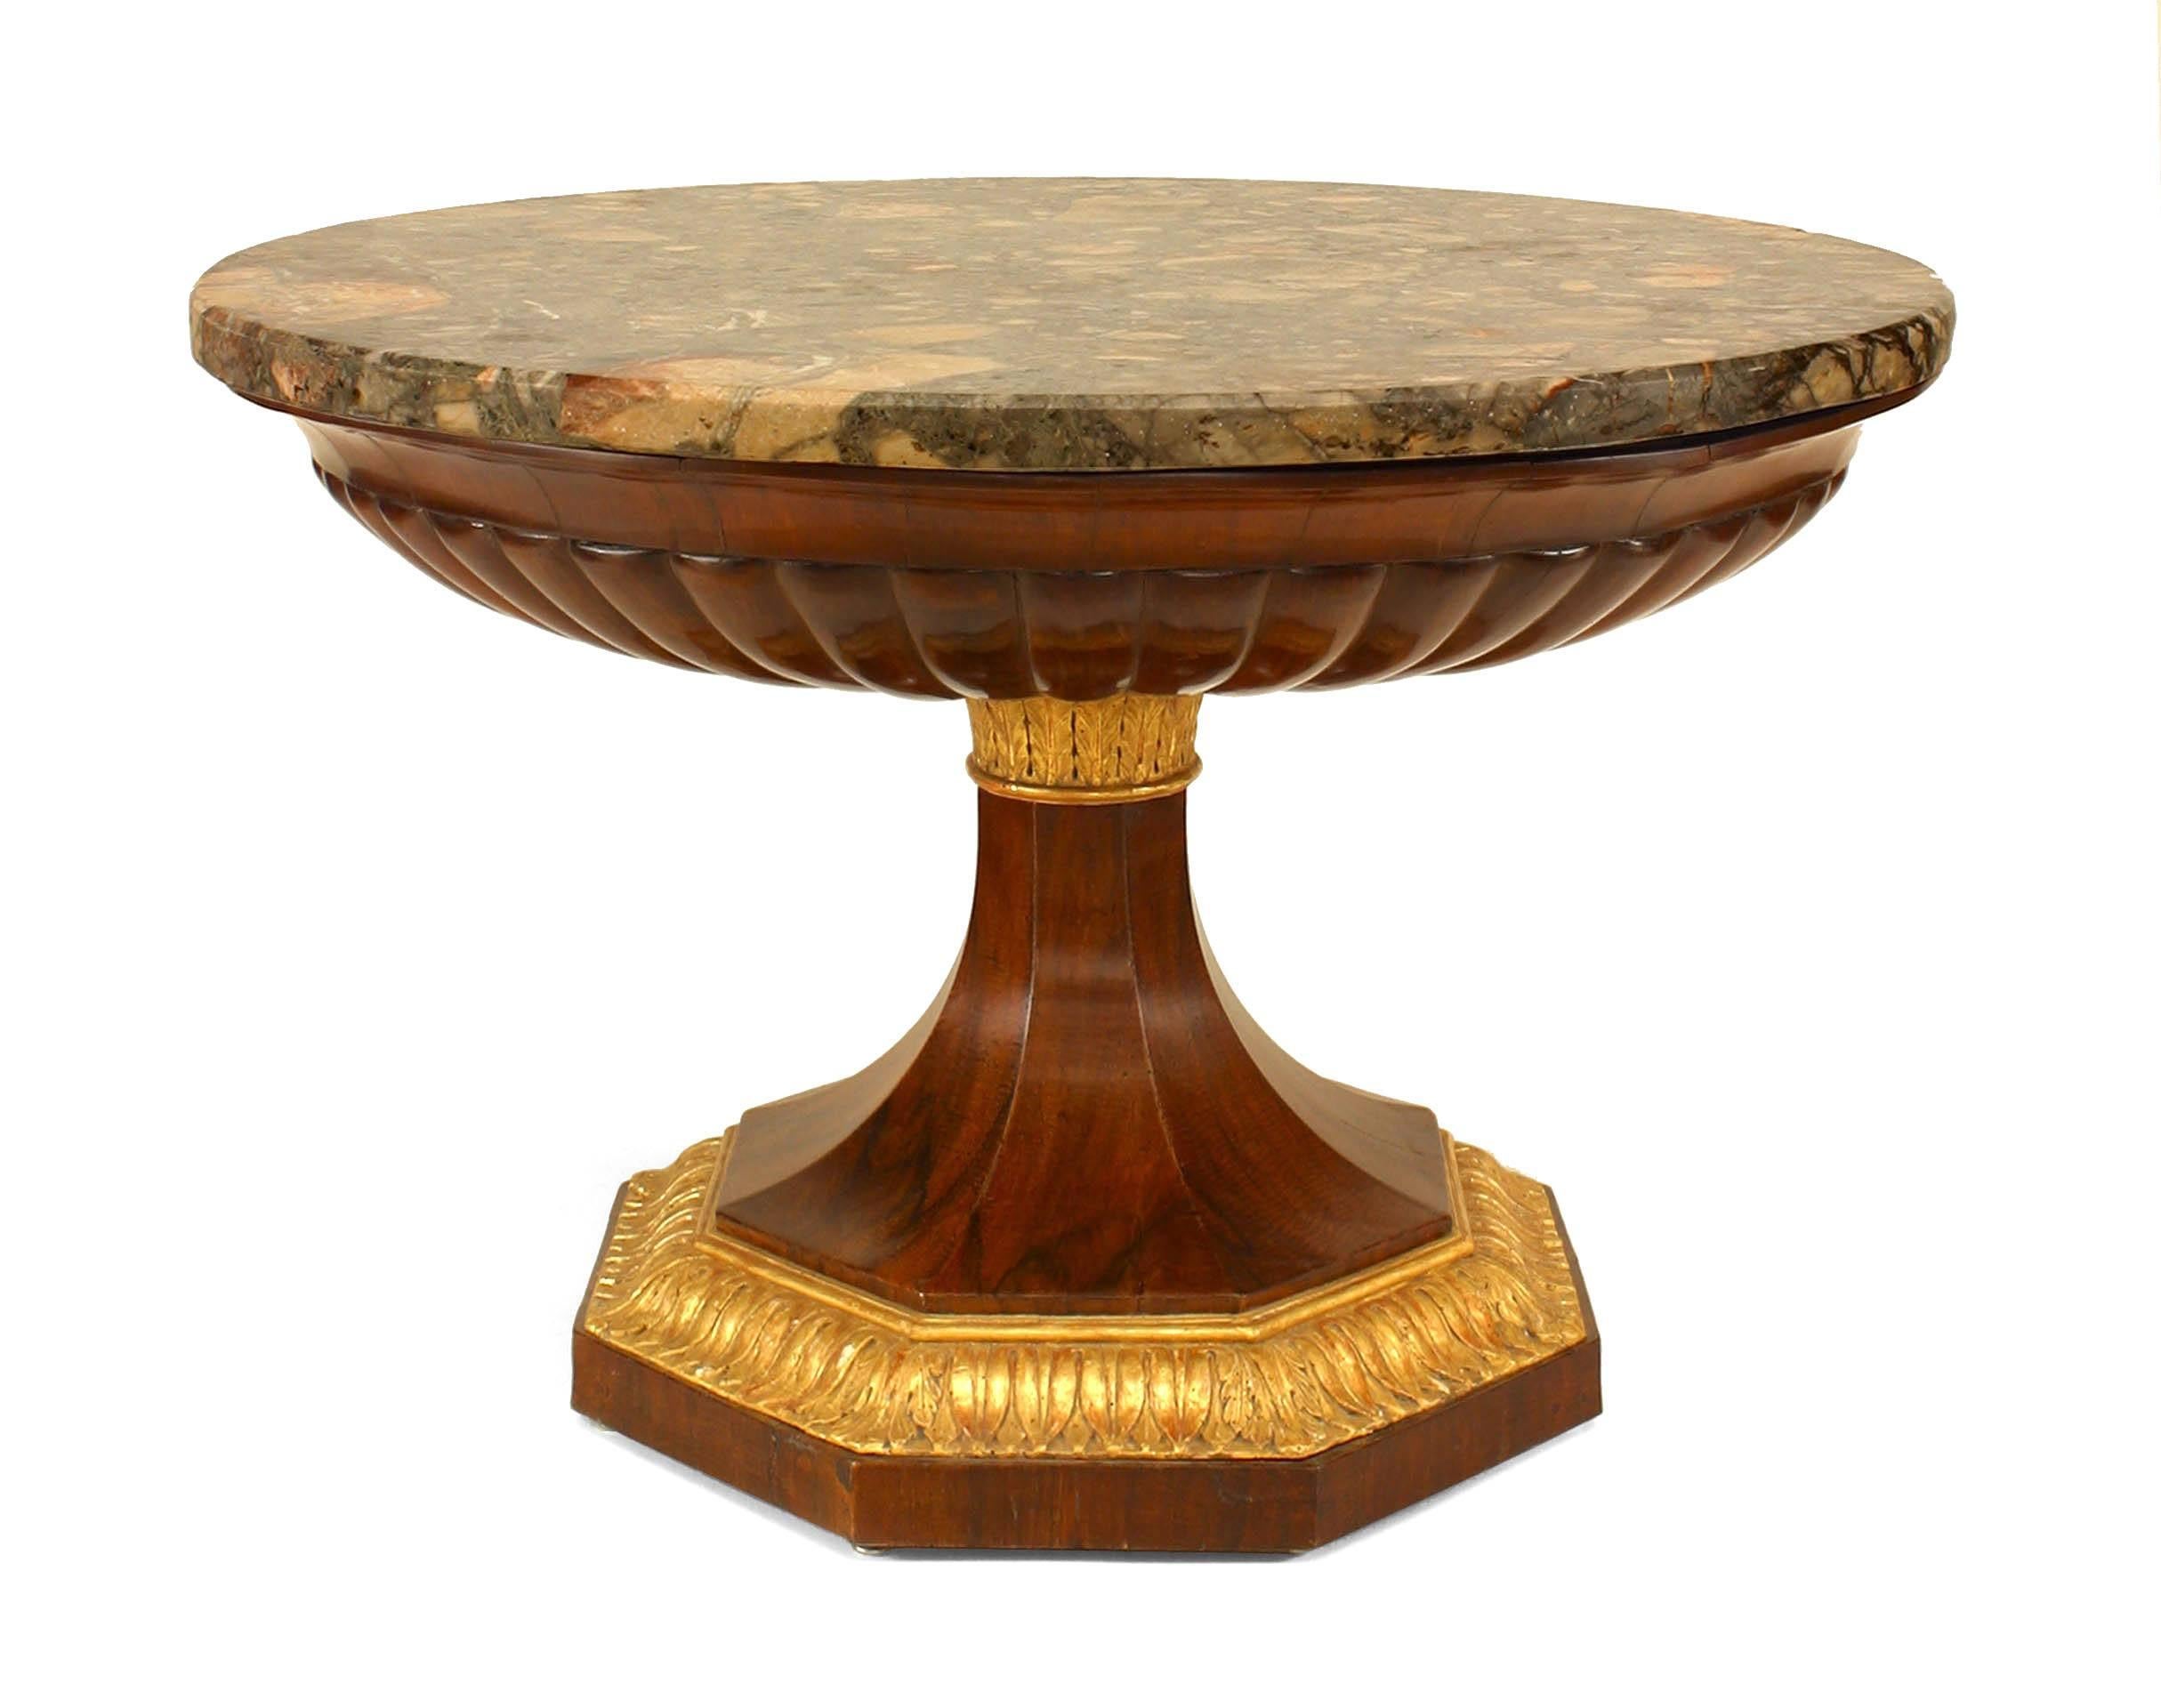 Italian Neapolitan neo-classic (circa 1820) walnut pedestal form center table with fluted basin and gilt carved trim supported on an octagonal base with a round Breccia marble top.
   